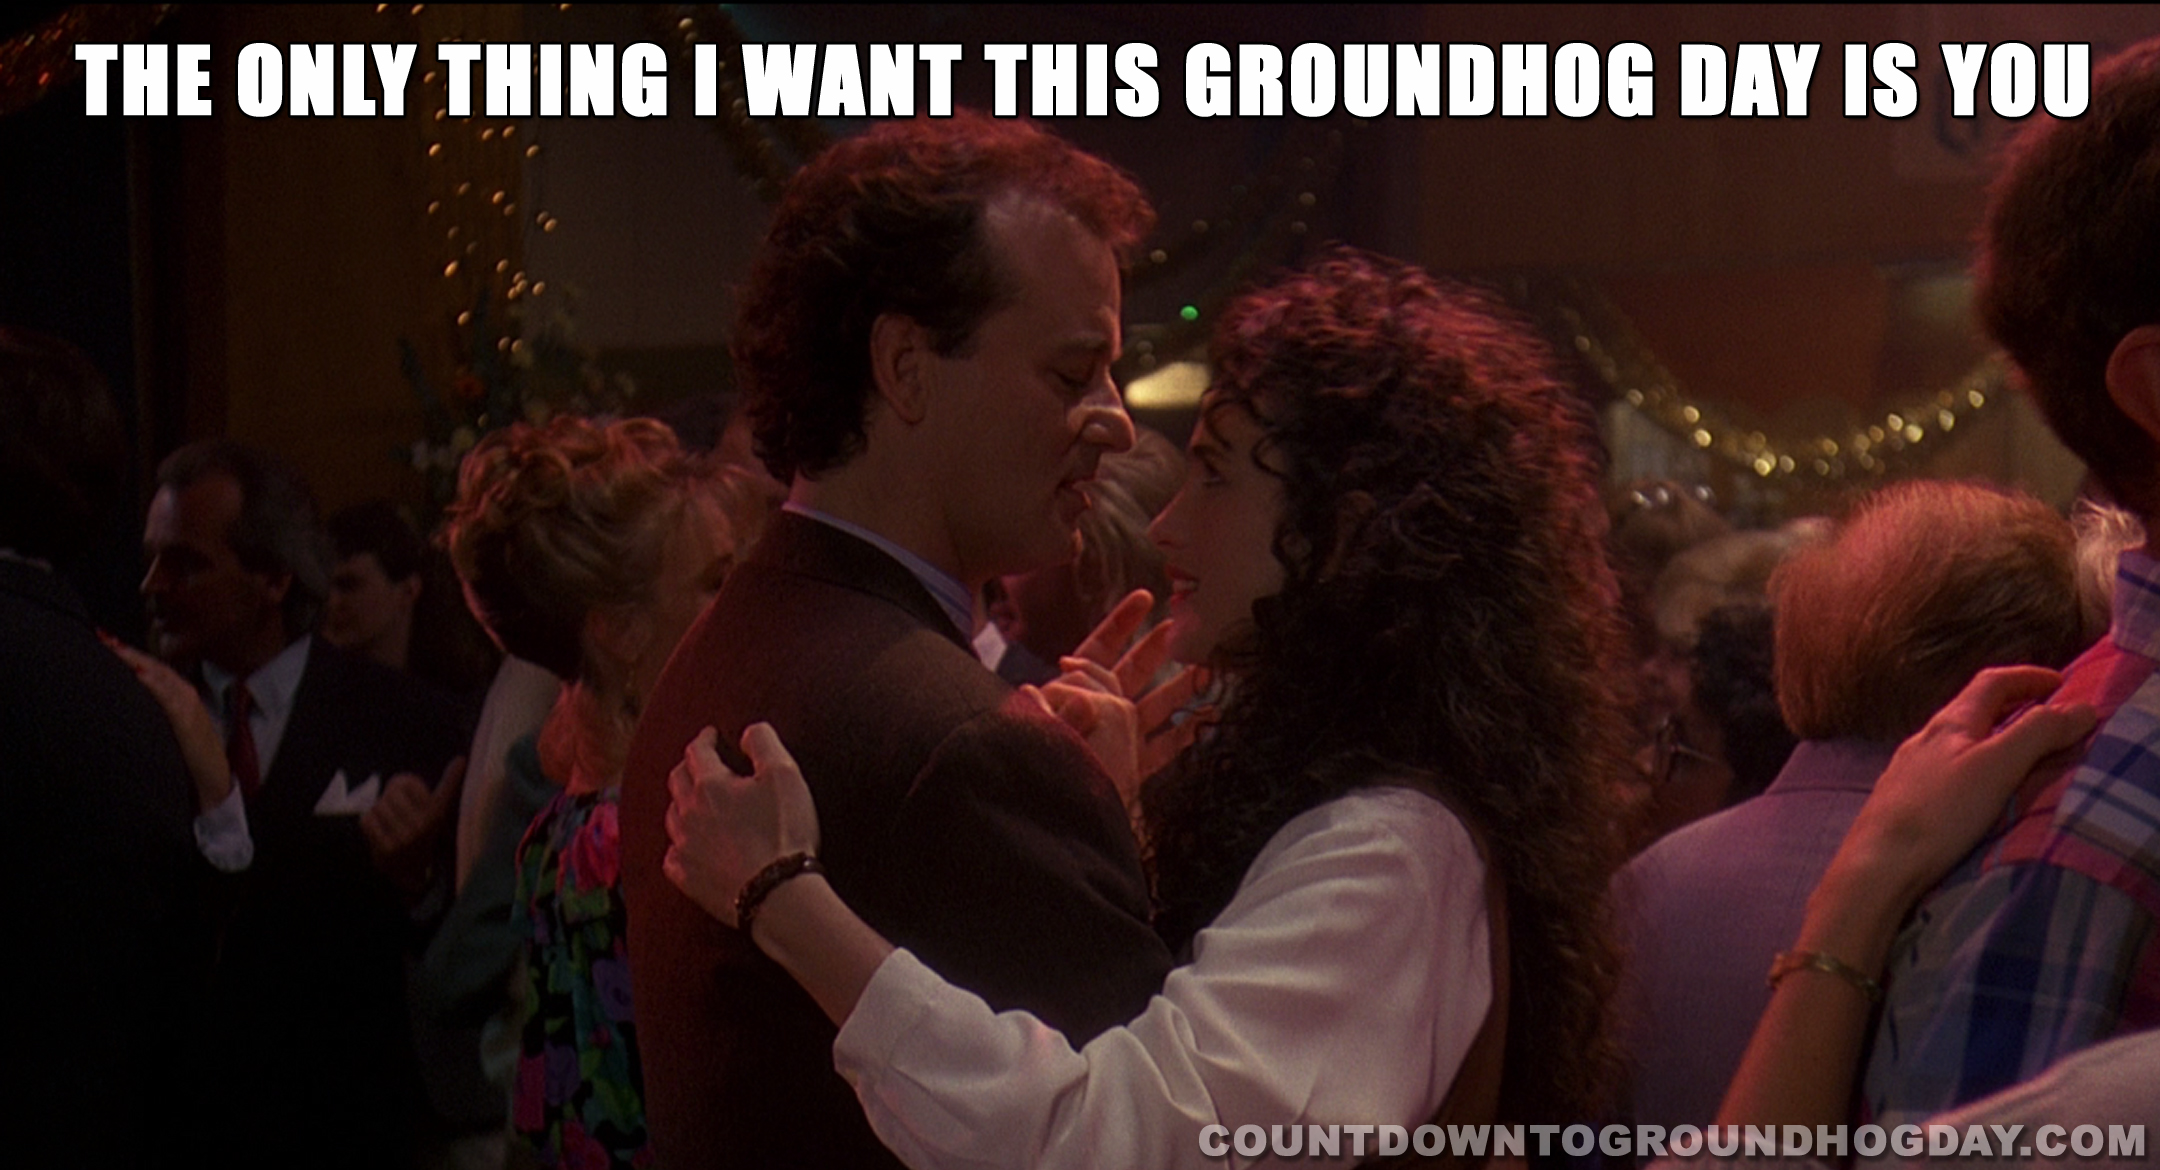 The only thing I want this Groundhog Day is you